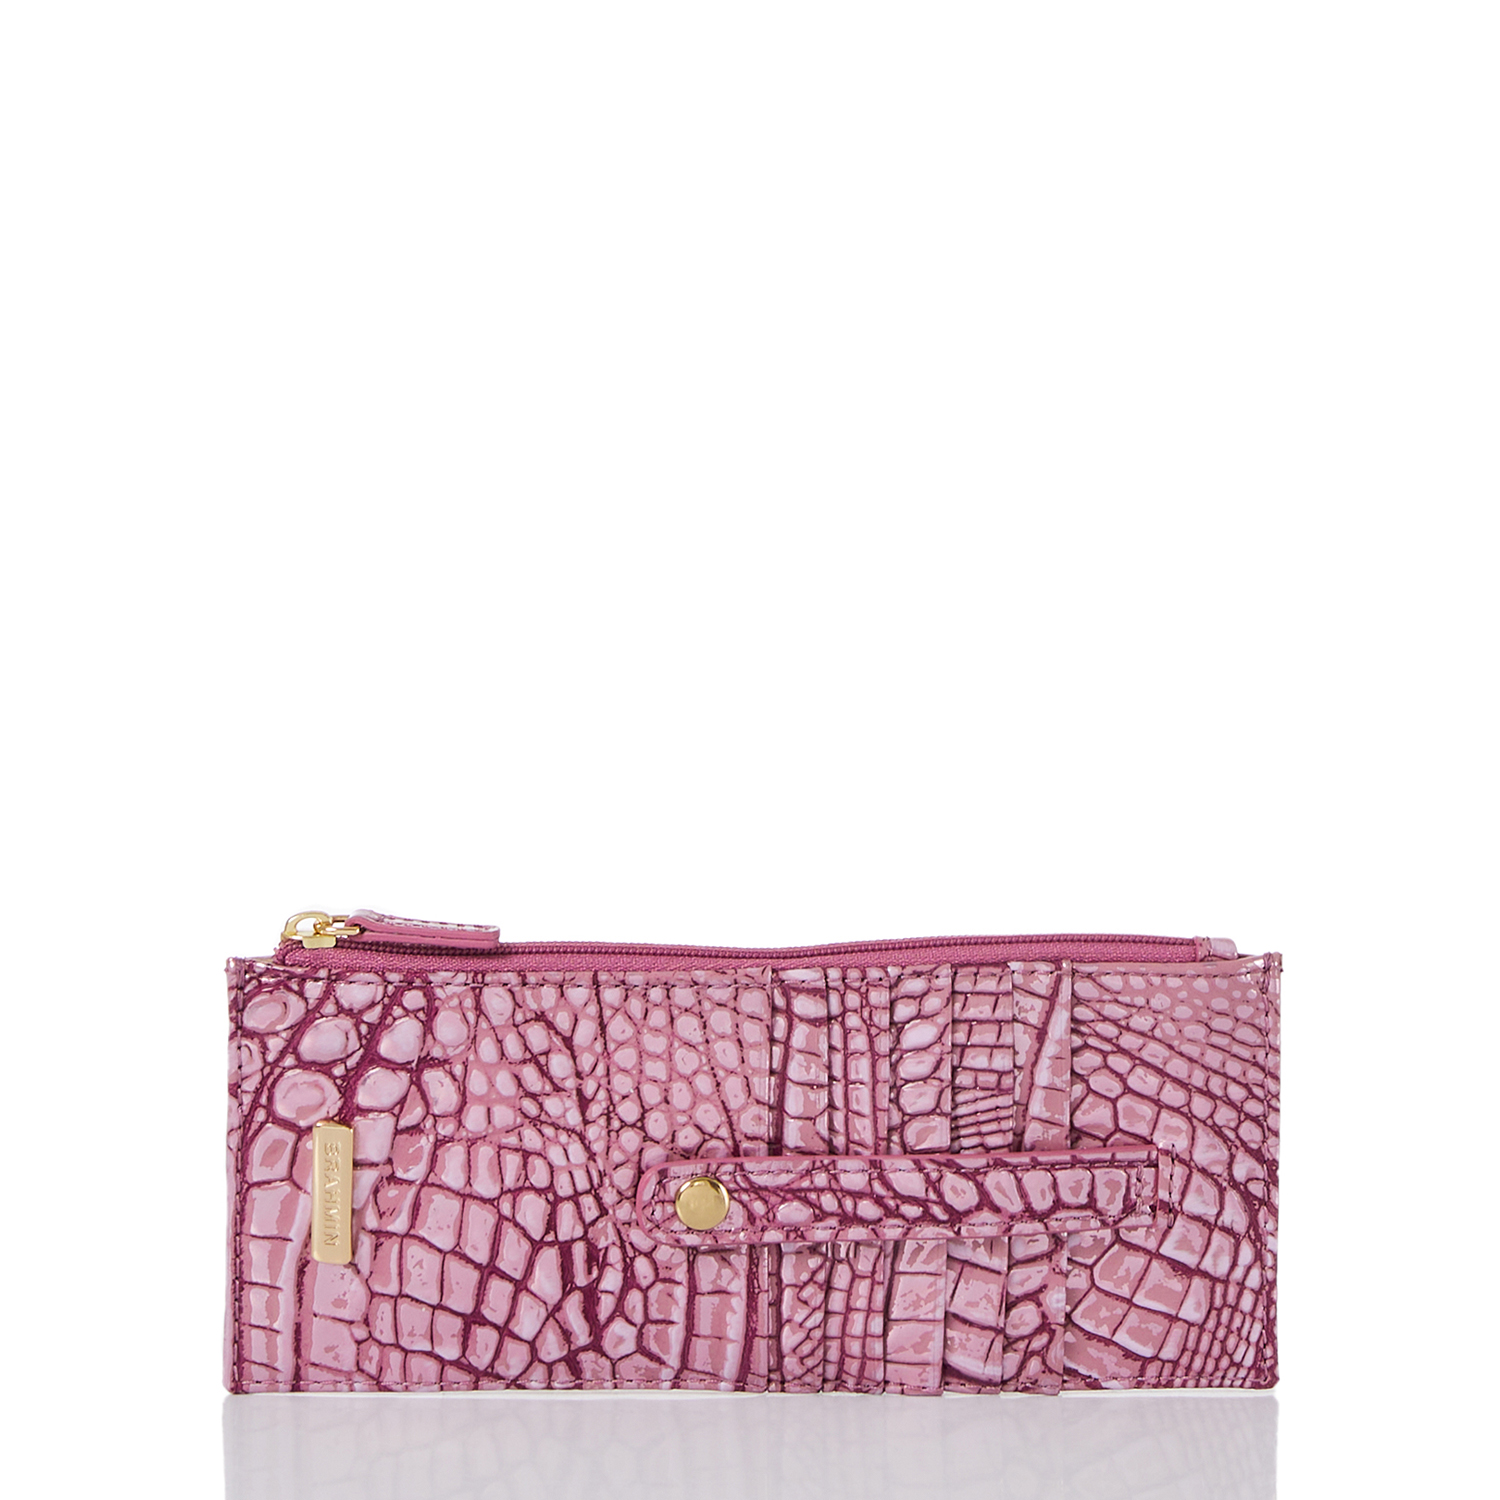 Shop Brahmin Credit Card Wallet Mulberry Potion Melbourne In Mulberrypotion